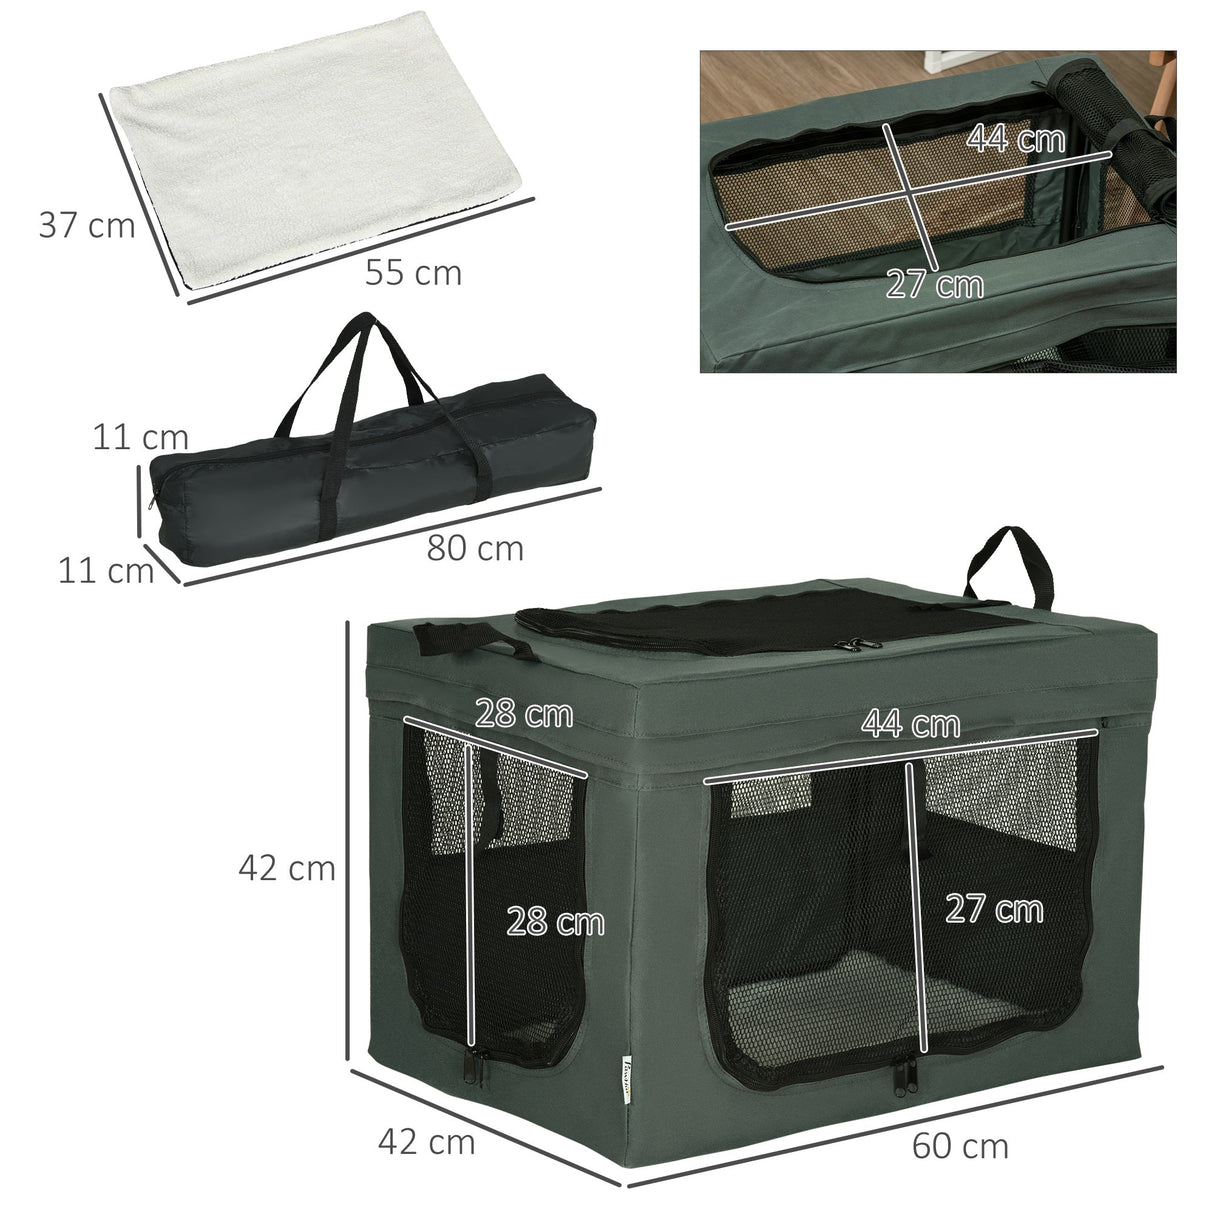 60cm Portable Pet Carrier with Soft Cushion & Mesh Window, for Miniature Dogs, PawHut, Grey